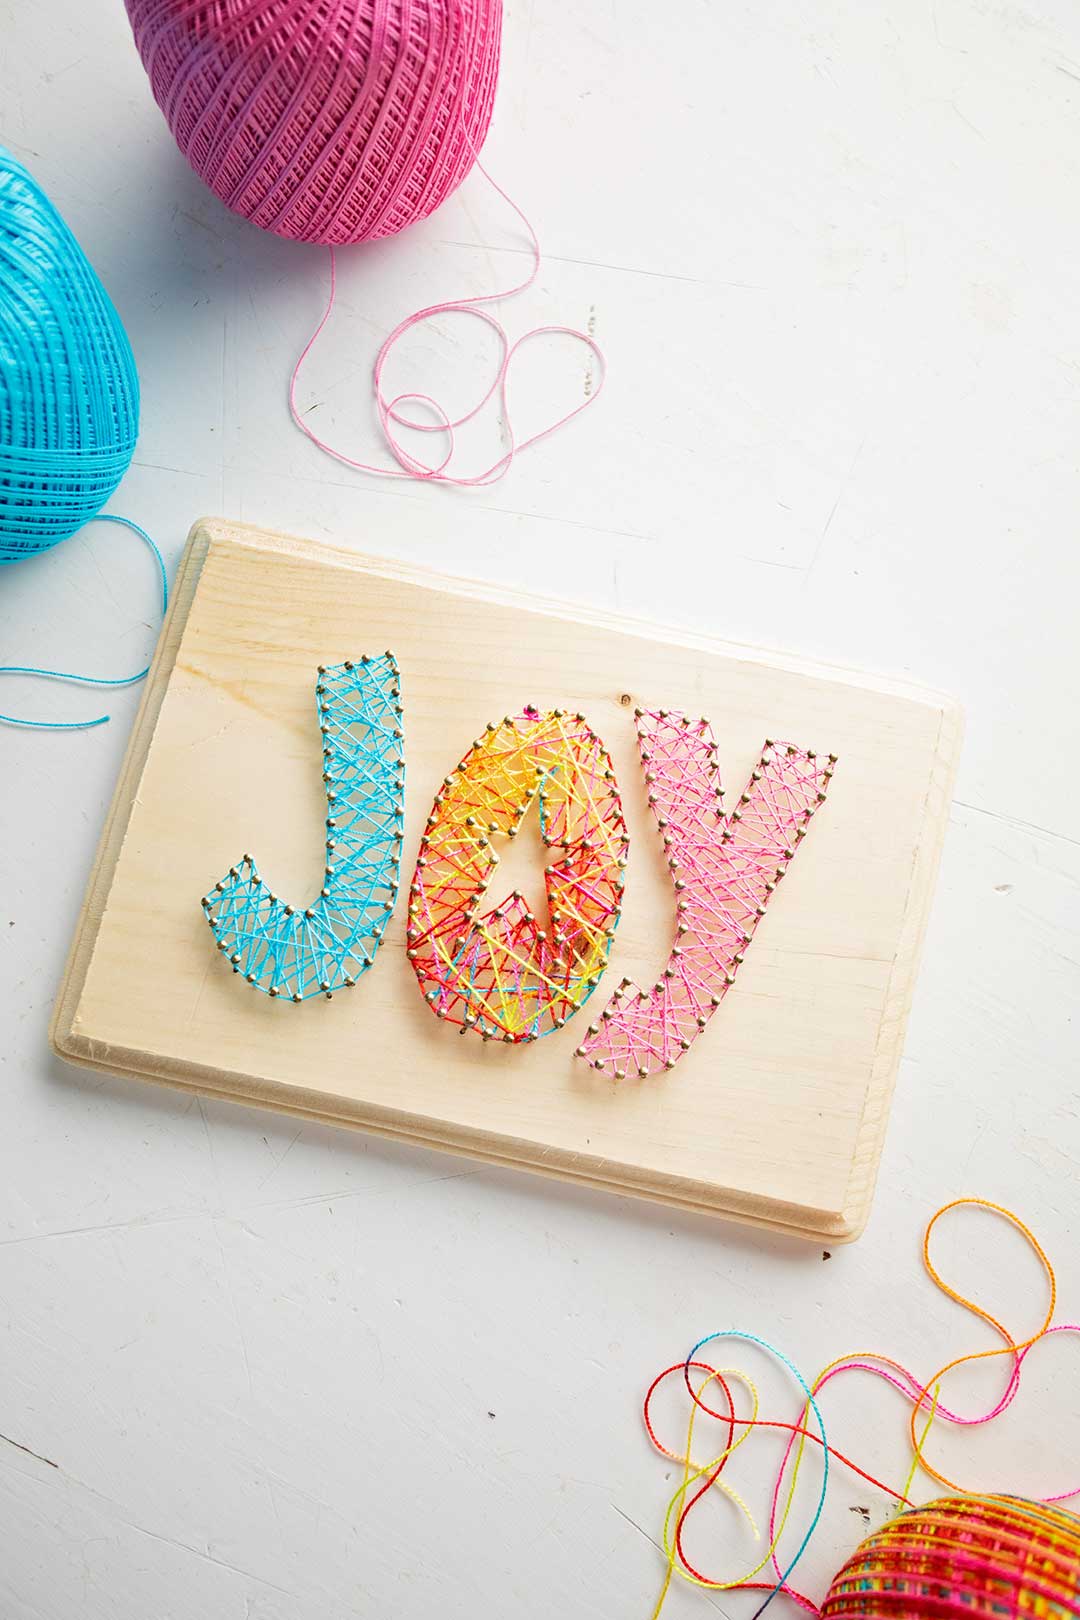 Finished "joy" string art on light wood with blue, pink and multi colored string near by.